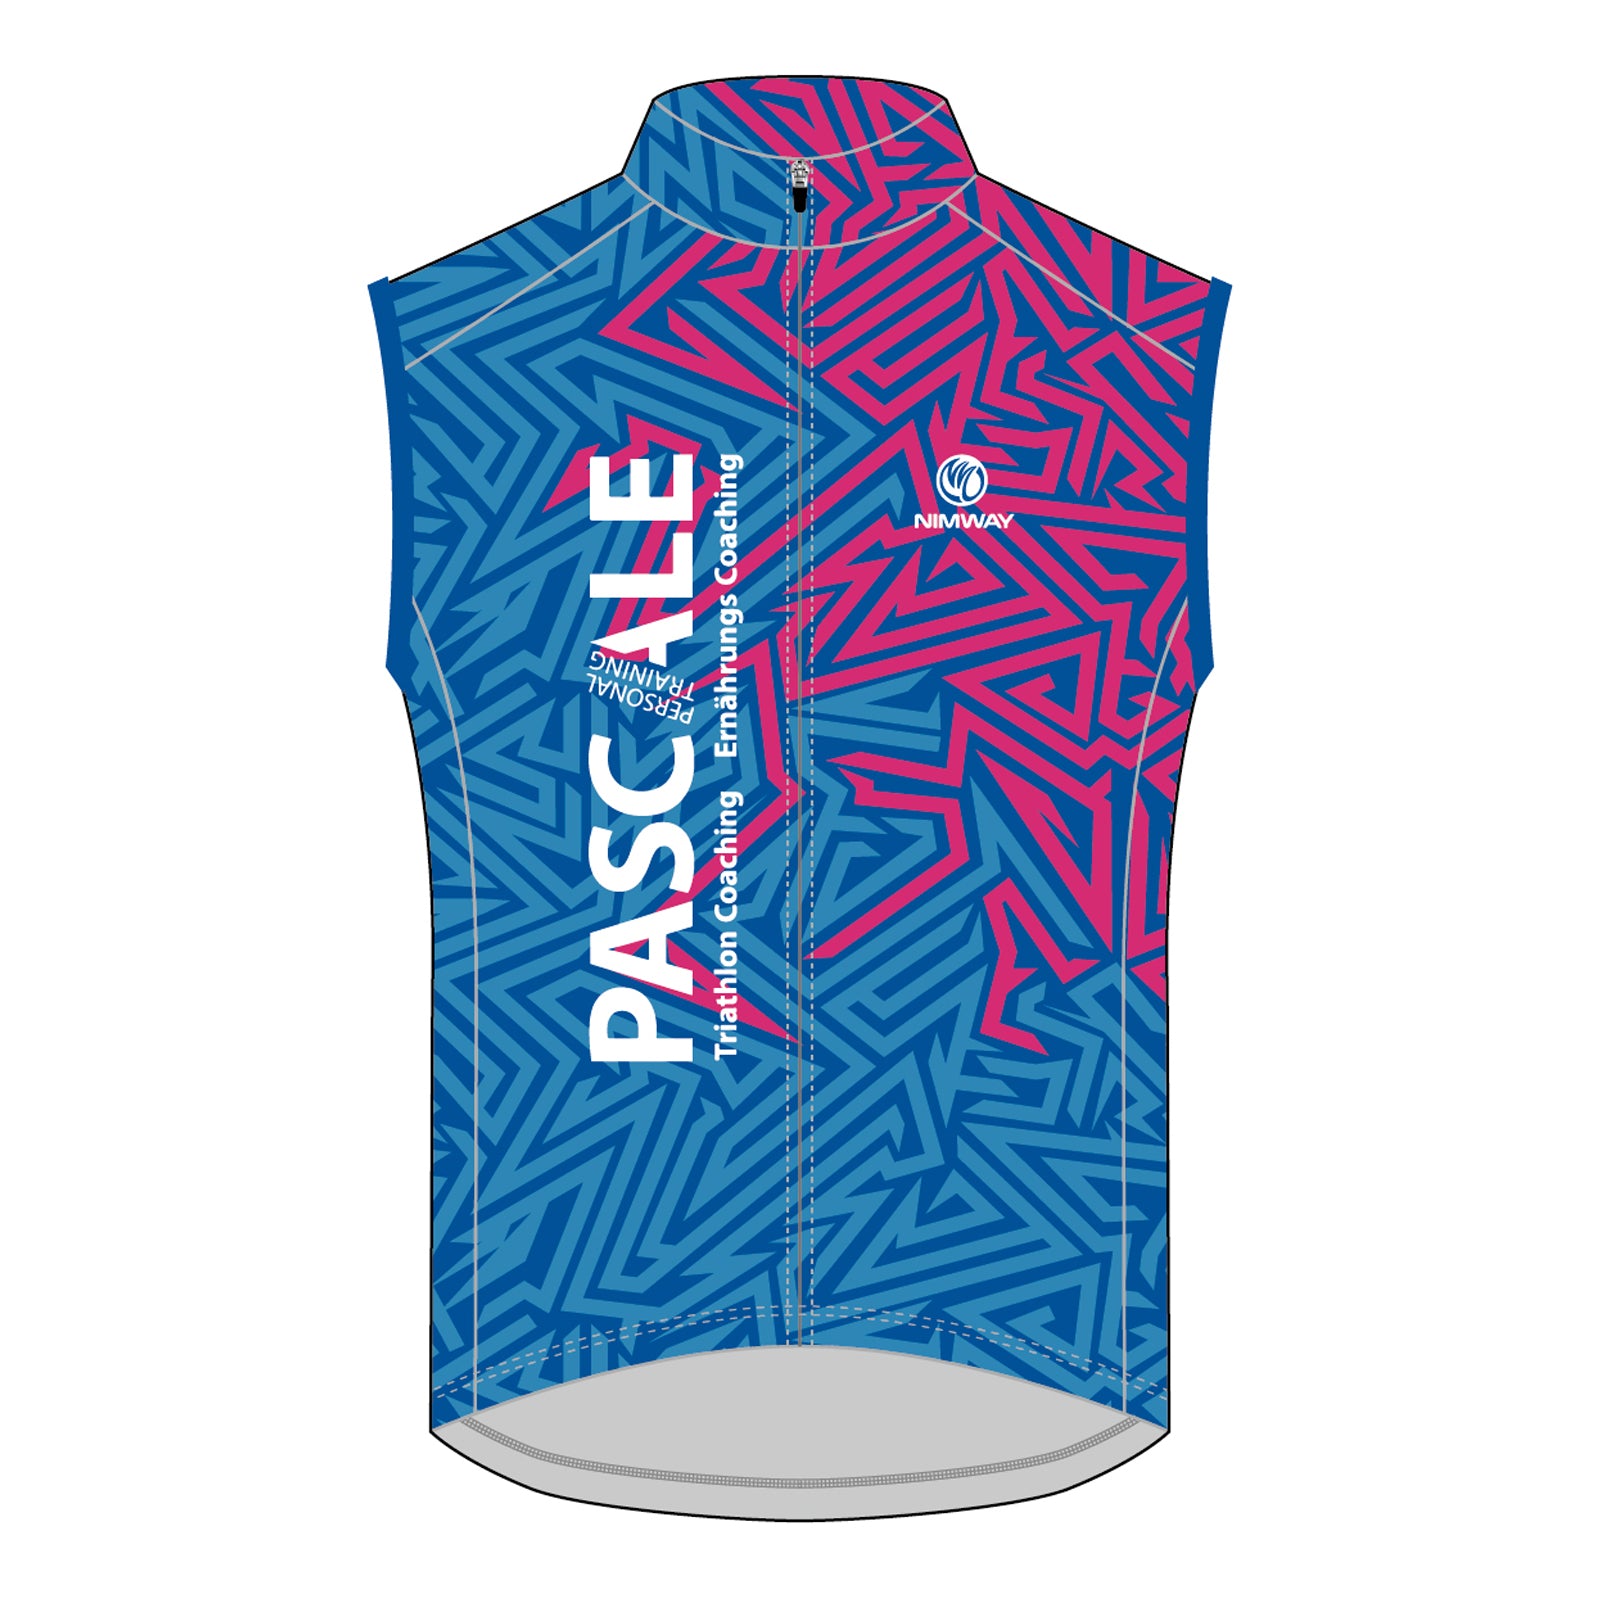 PASCALE Cycling Wind Vest, lightweight